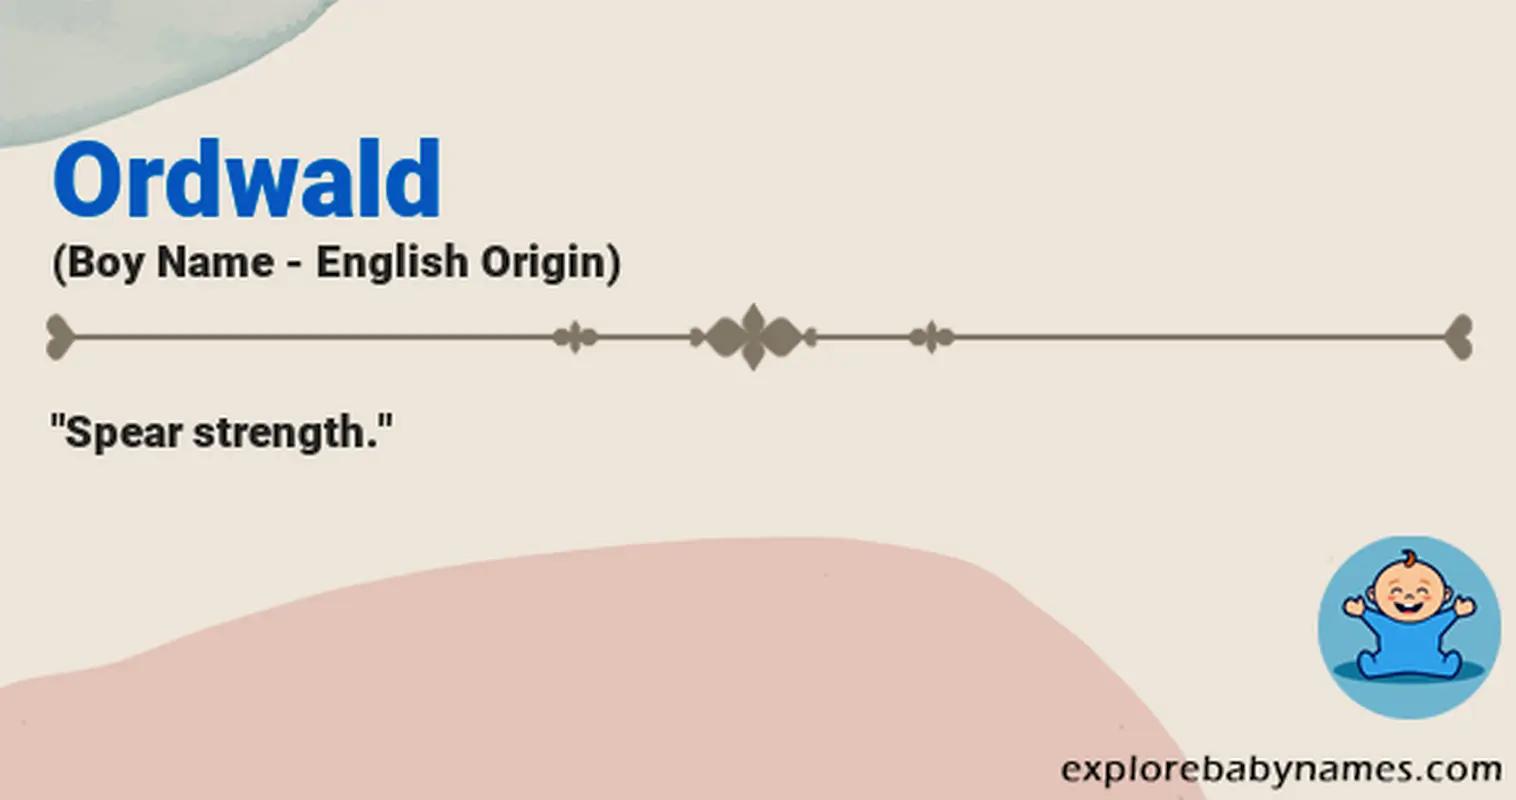 Meaning of Ordwald